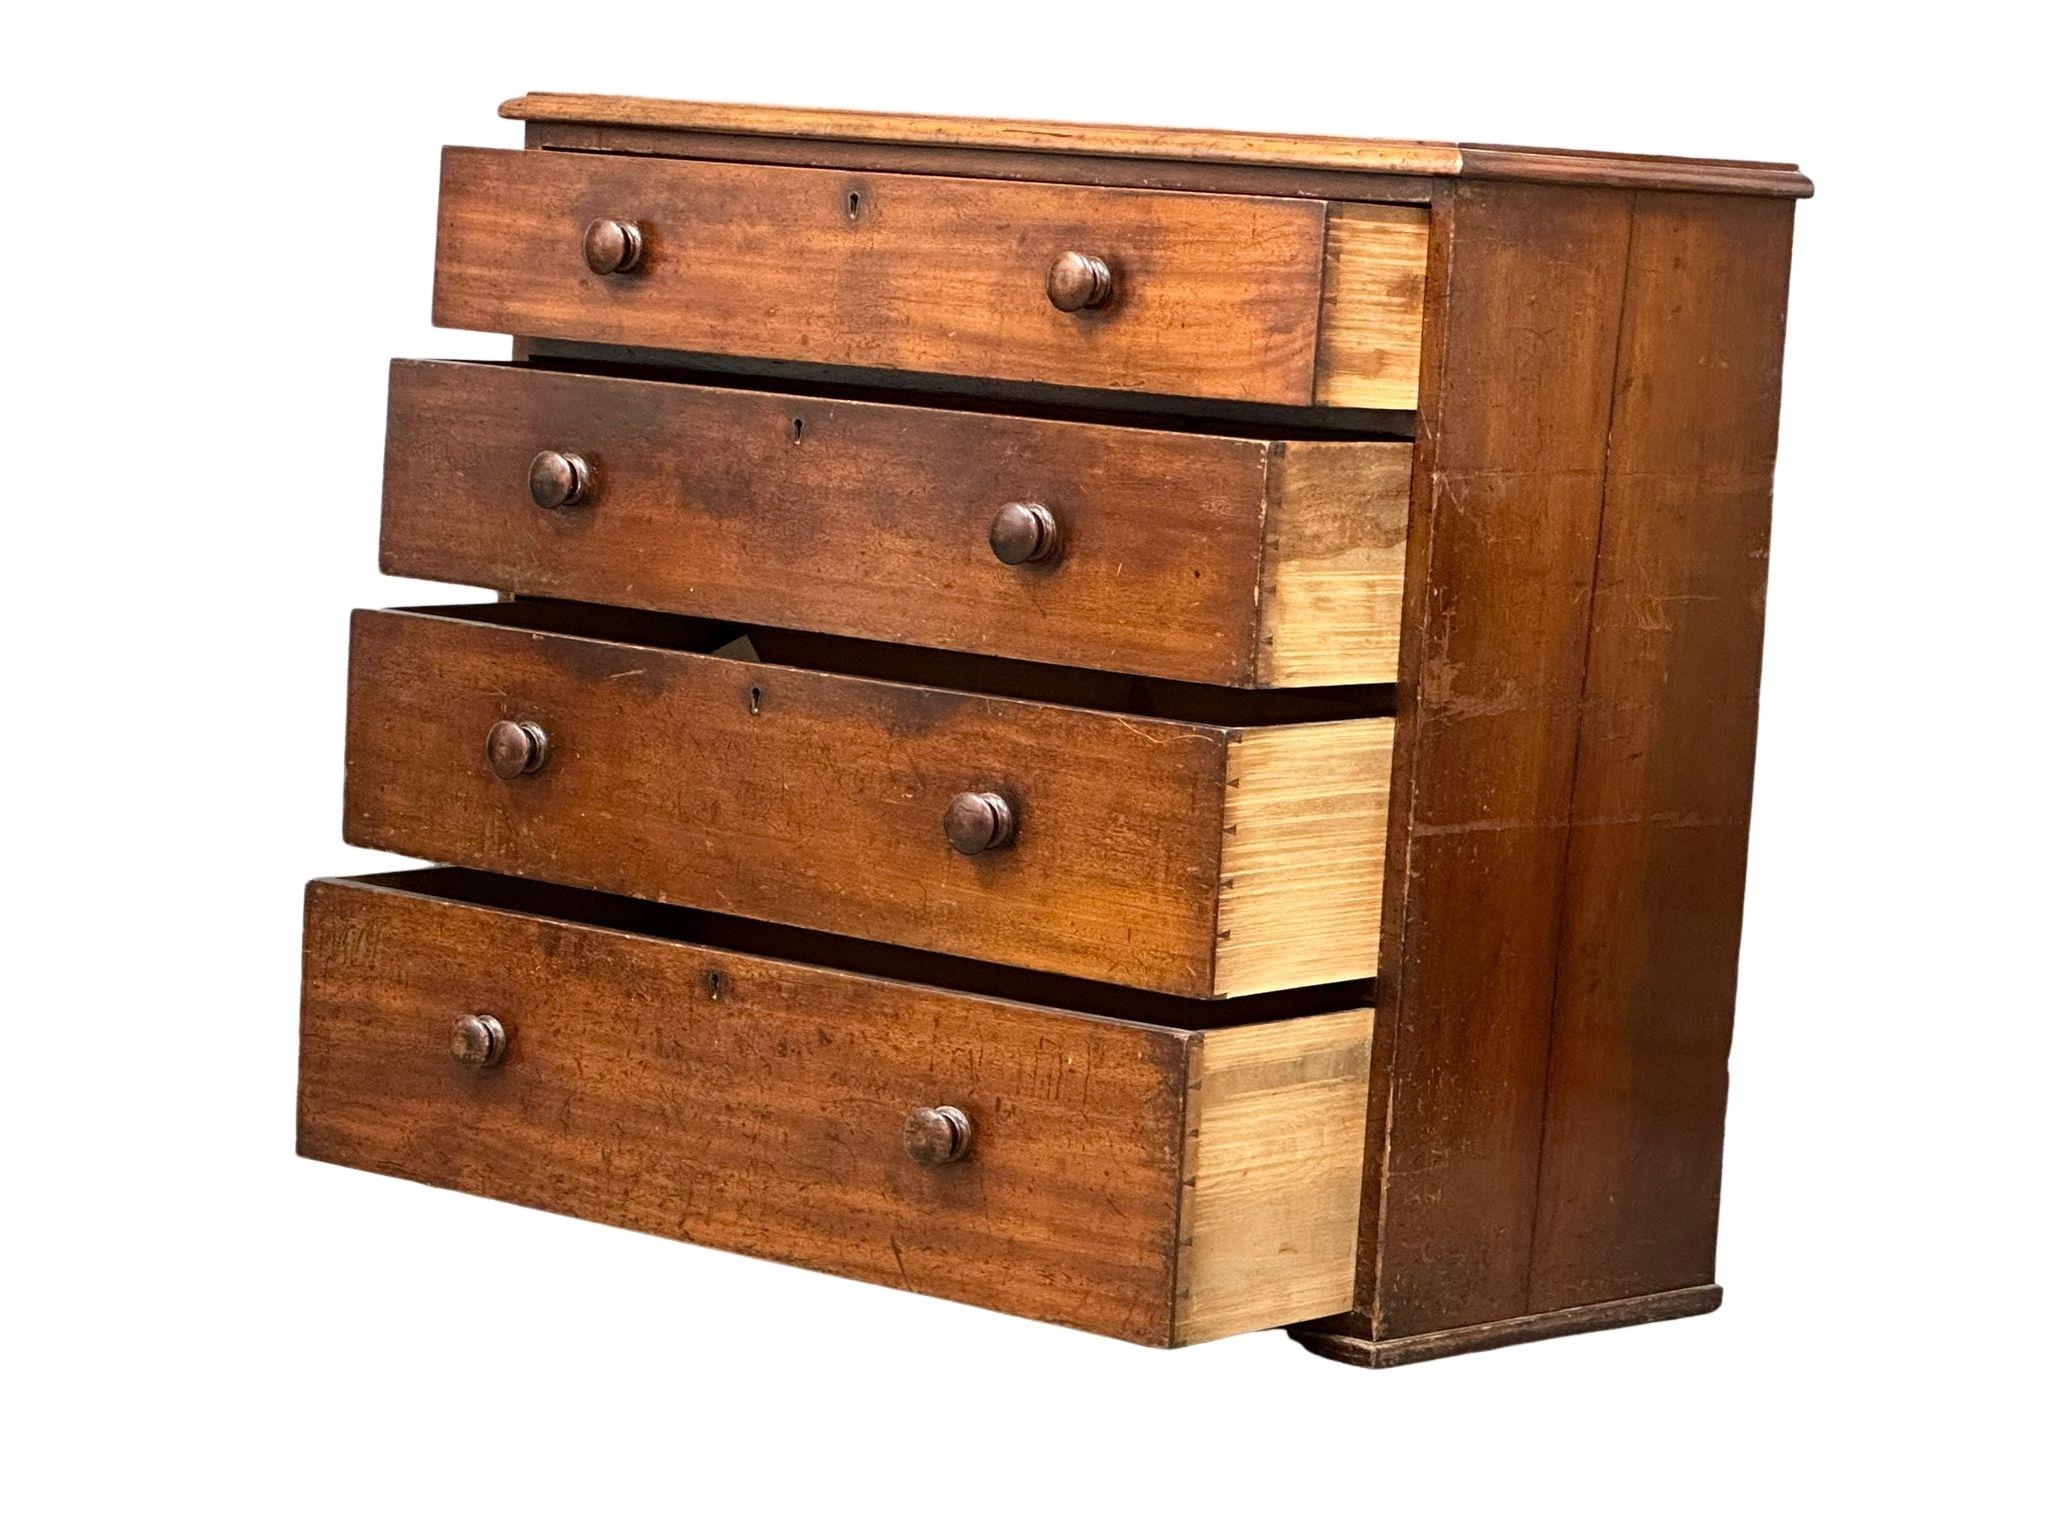 A large Victorian mahogany chest of drawers with bun handles, 109cm x 51cm x 101cm - Image 2 of 5